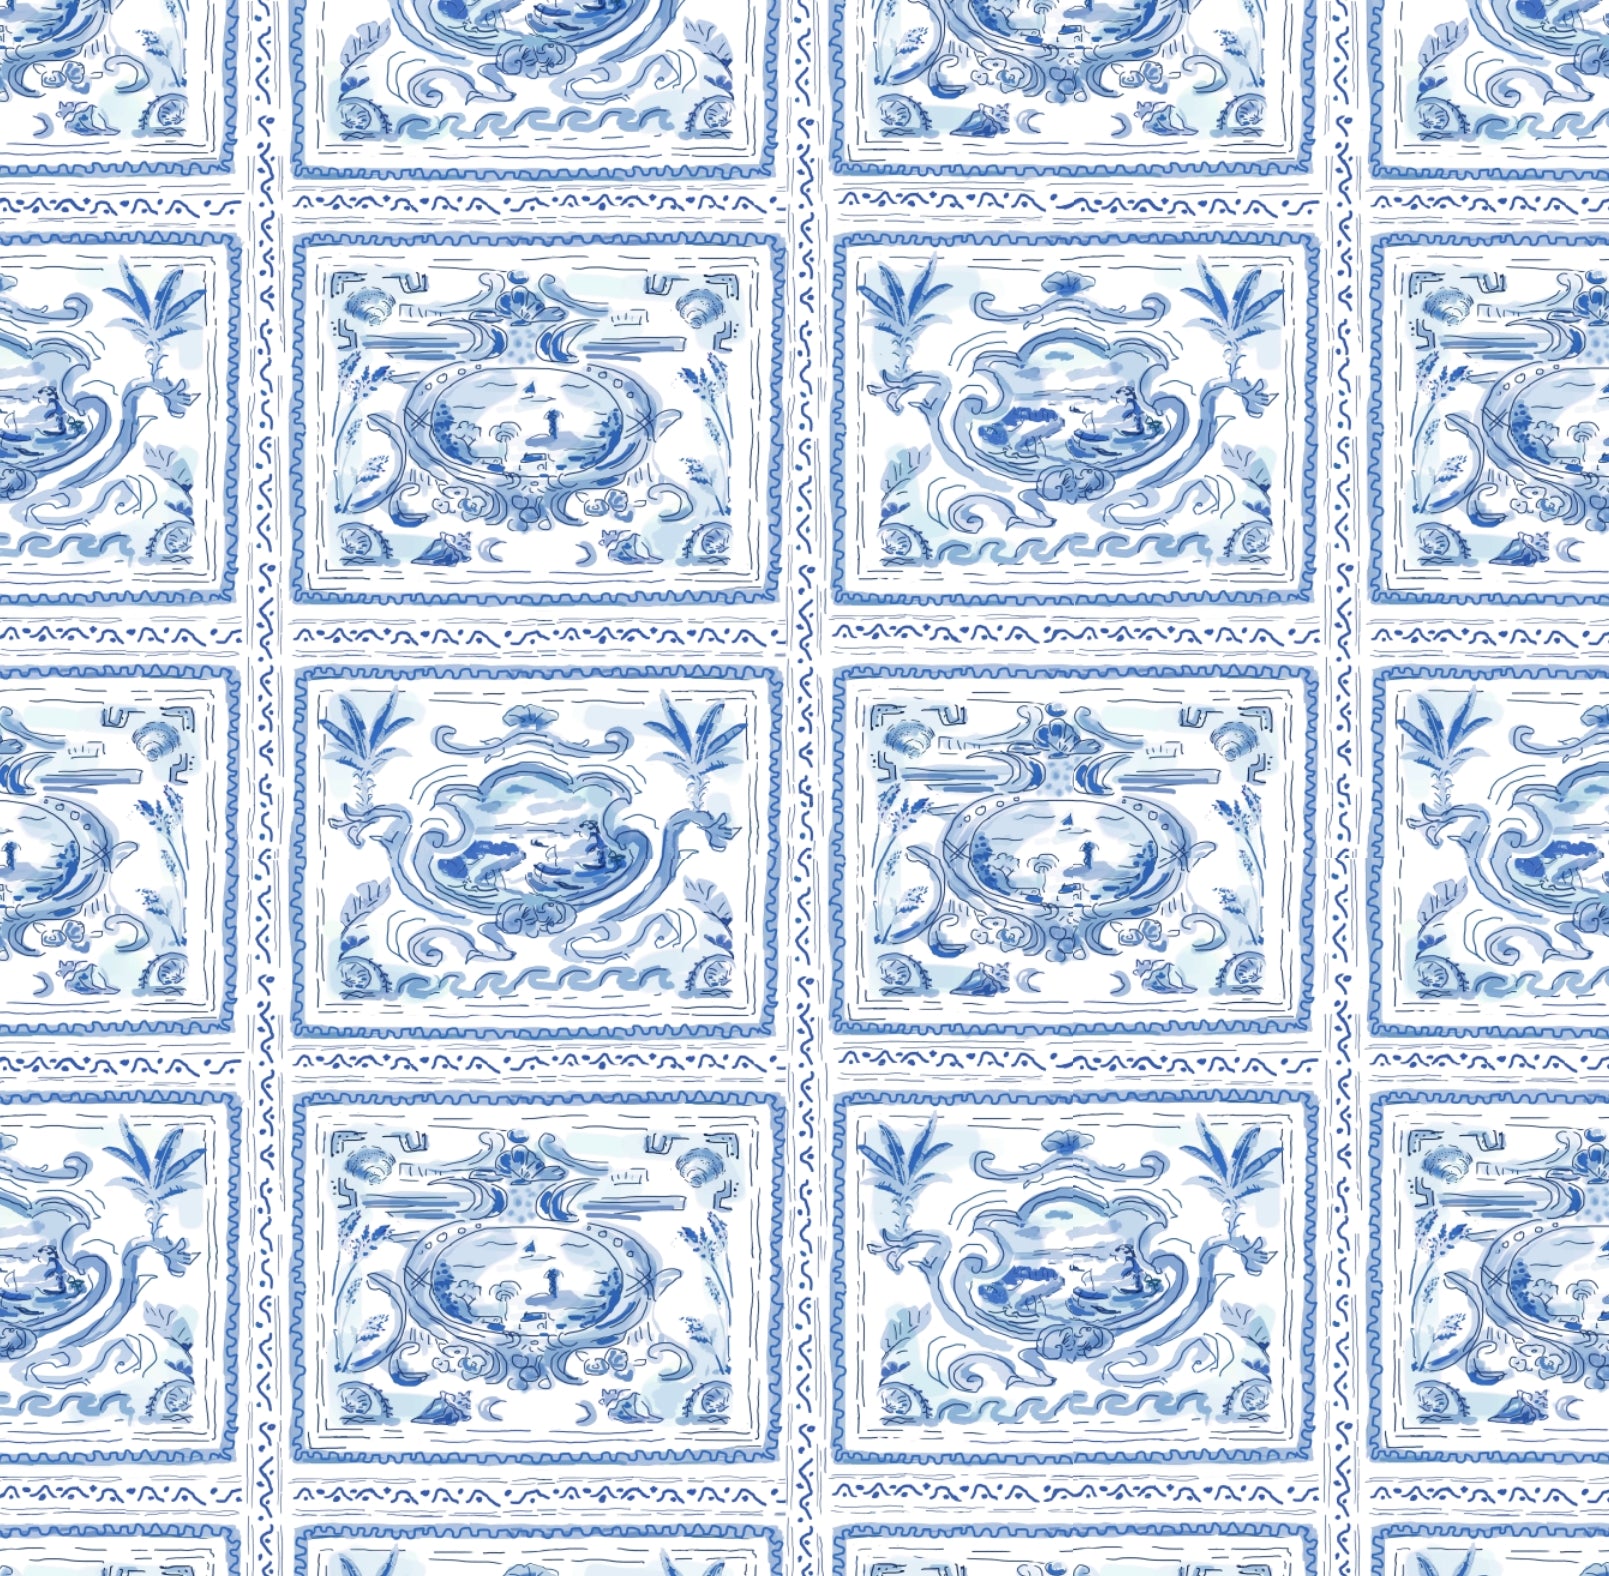 Pliny Toile in Blue, Wall Paper and Fabric